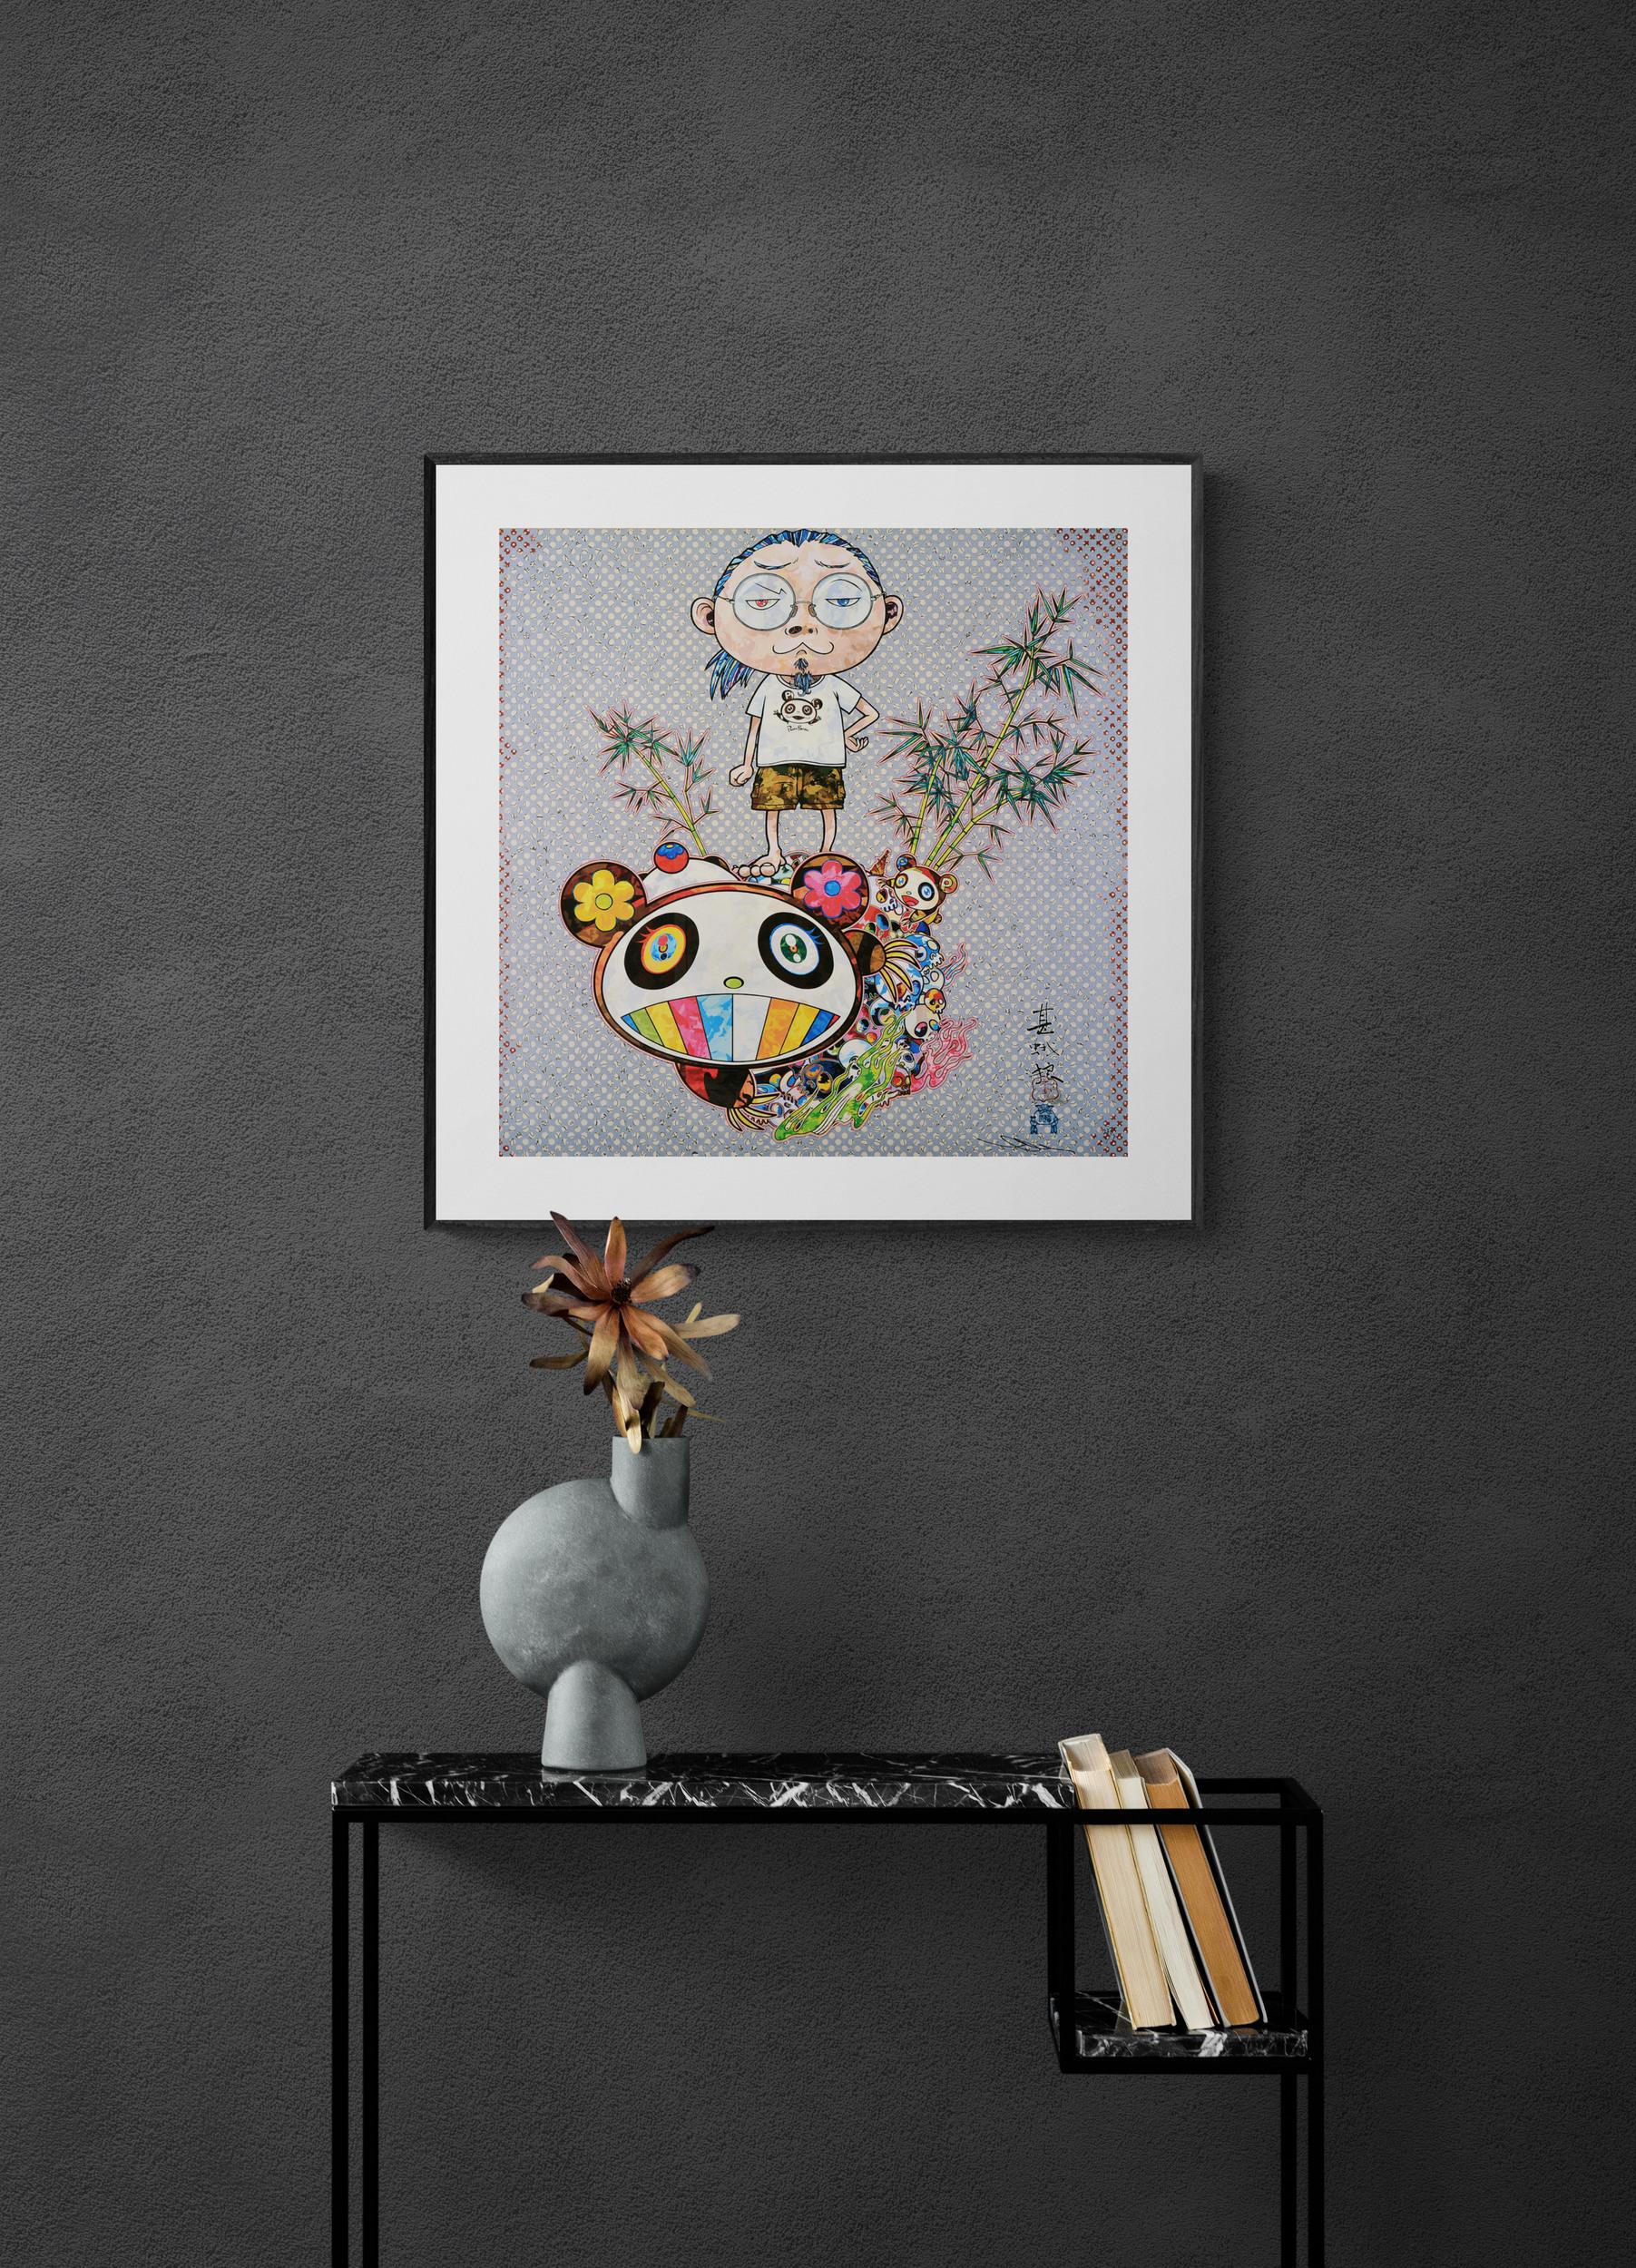 I META A PANDA FAMILY
Date of creation: 2015
Medium: Offset lithograph with silver on paper
Edition number: 233/300
Size: 50 x 50 cm
Observations: Offset lithograph with silver on paper hand signed by Takashi Murakami. Numbered edition of 300.